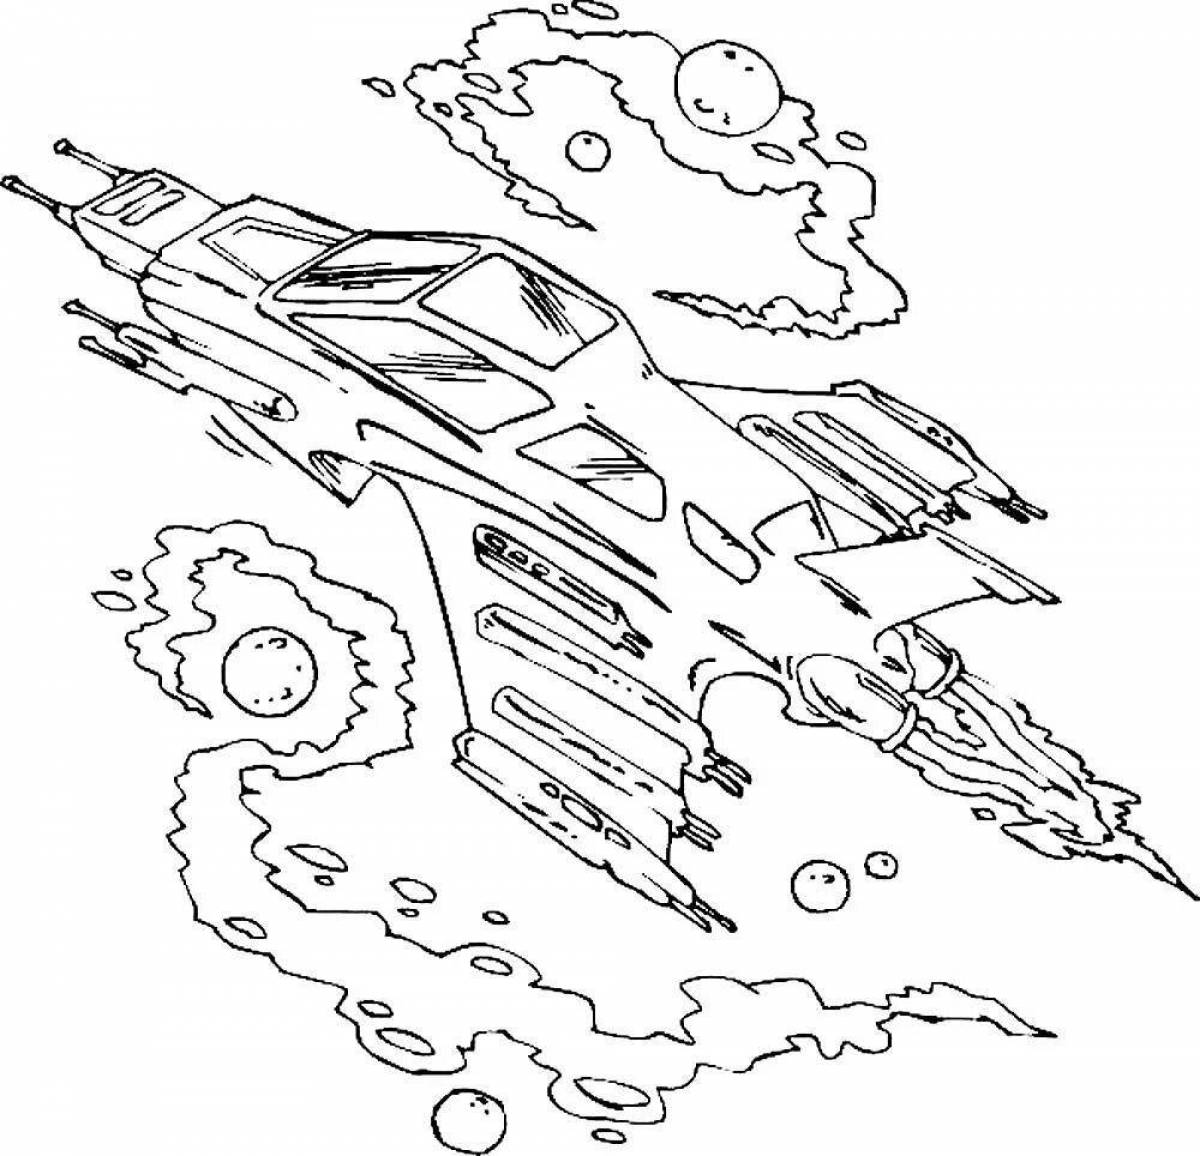 Coloring page inviting space wars